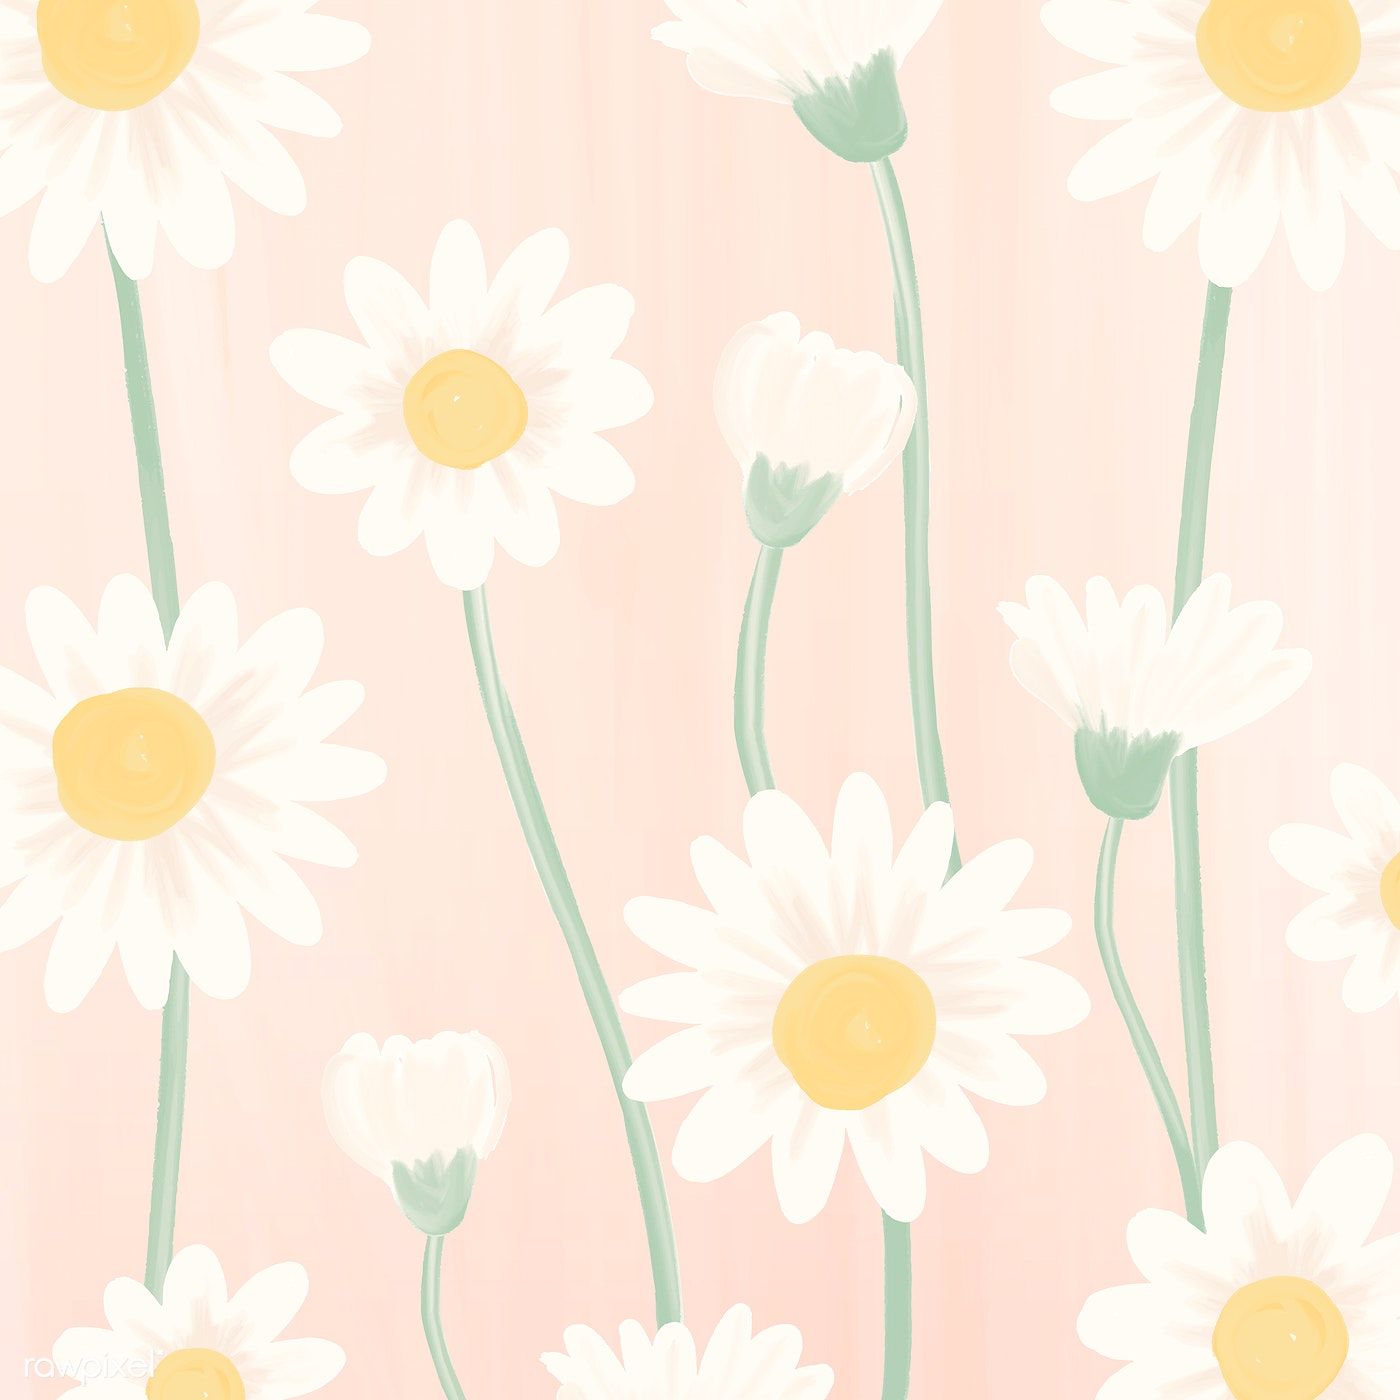 Free download Download premium vector of Hand drawn daisy patterned